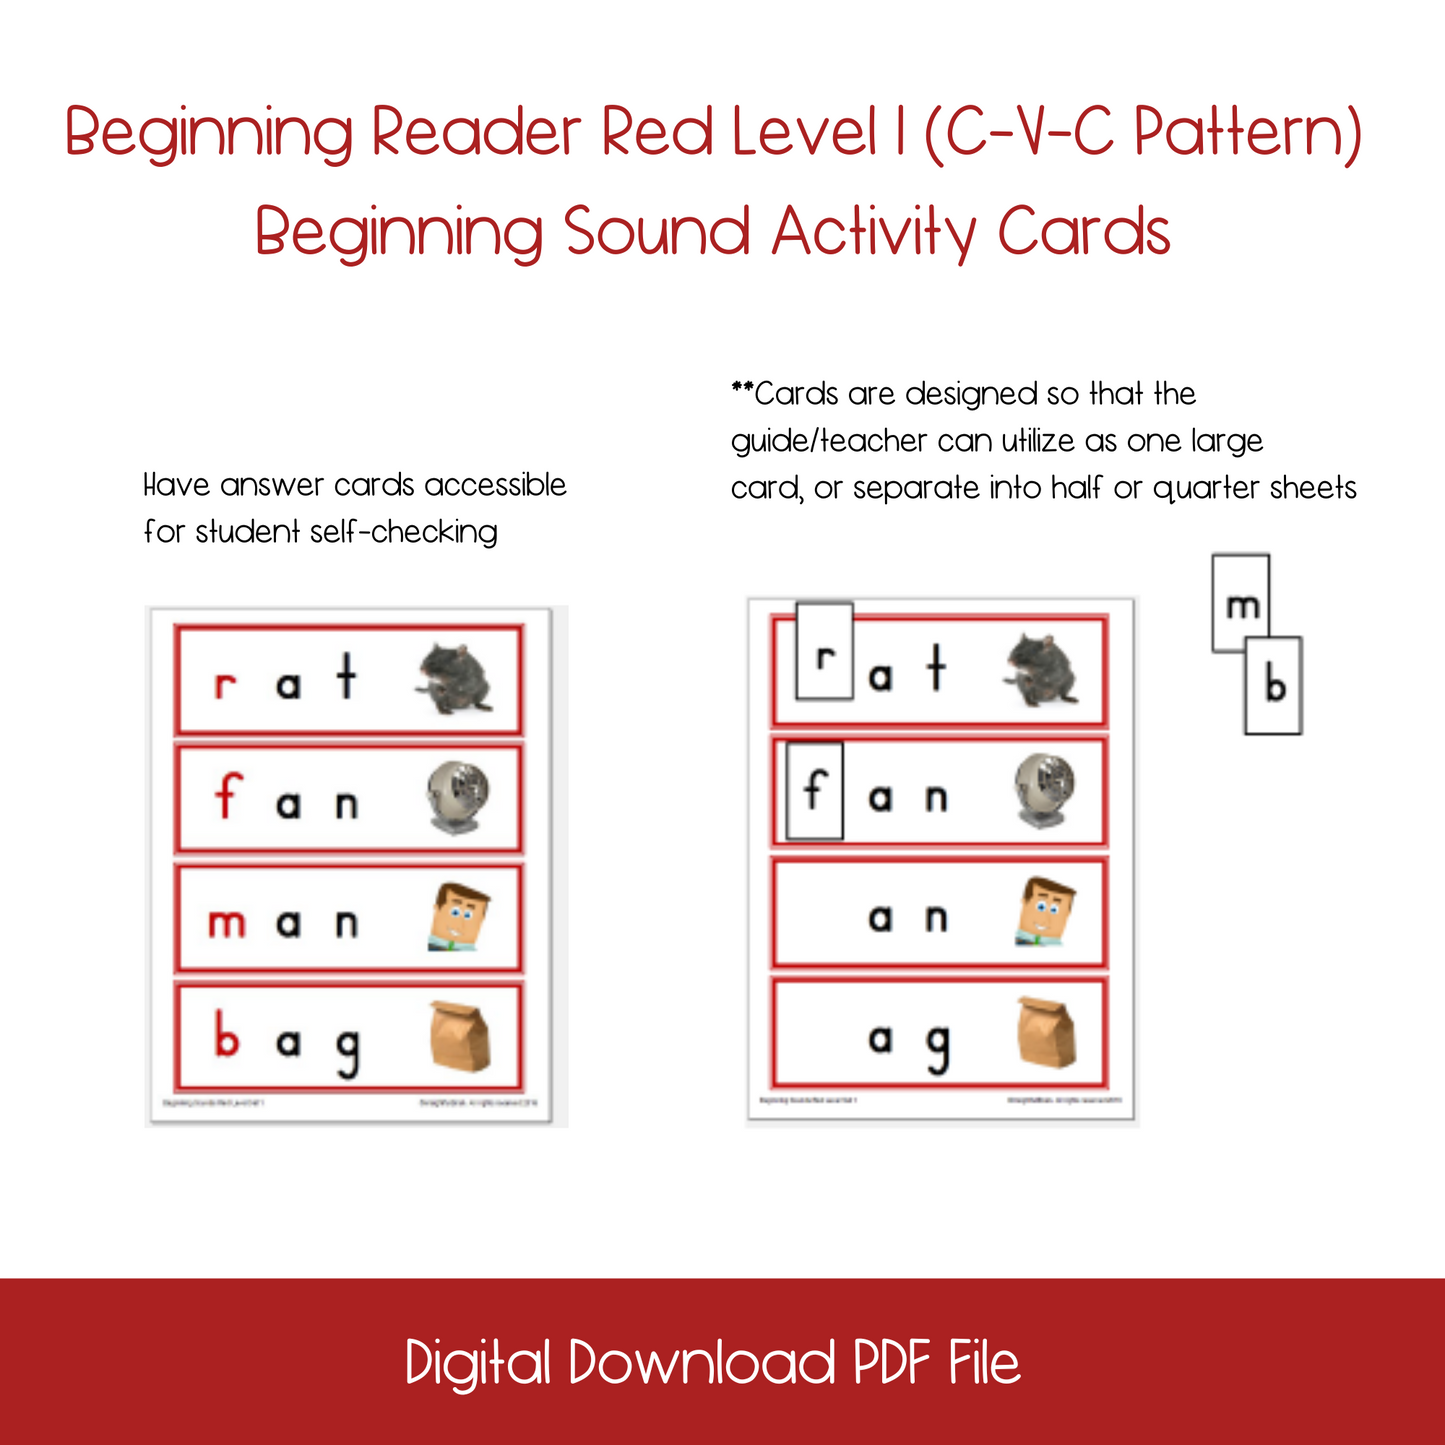 Printable Beginning Sound Activity Cards Set1, montessori Printable Beginning Sound Activity Cards Set1, homeschool Printable Beginning Sound Activity Cards Set1, printable ESL Beginning Sound Activity Cards Set1, printable ELL Beginning Sound Activity Cards Set1, printable kindergarten beginning sound actcivity, English language learners